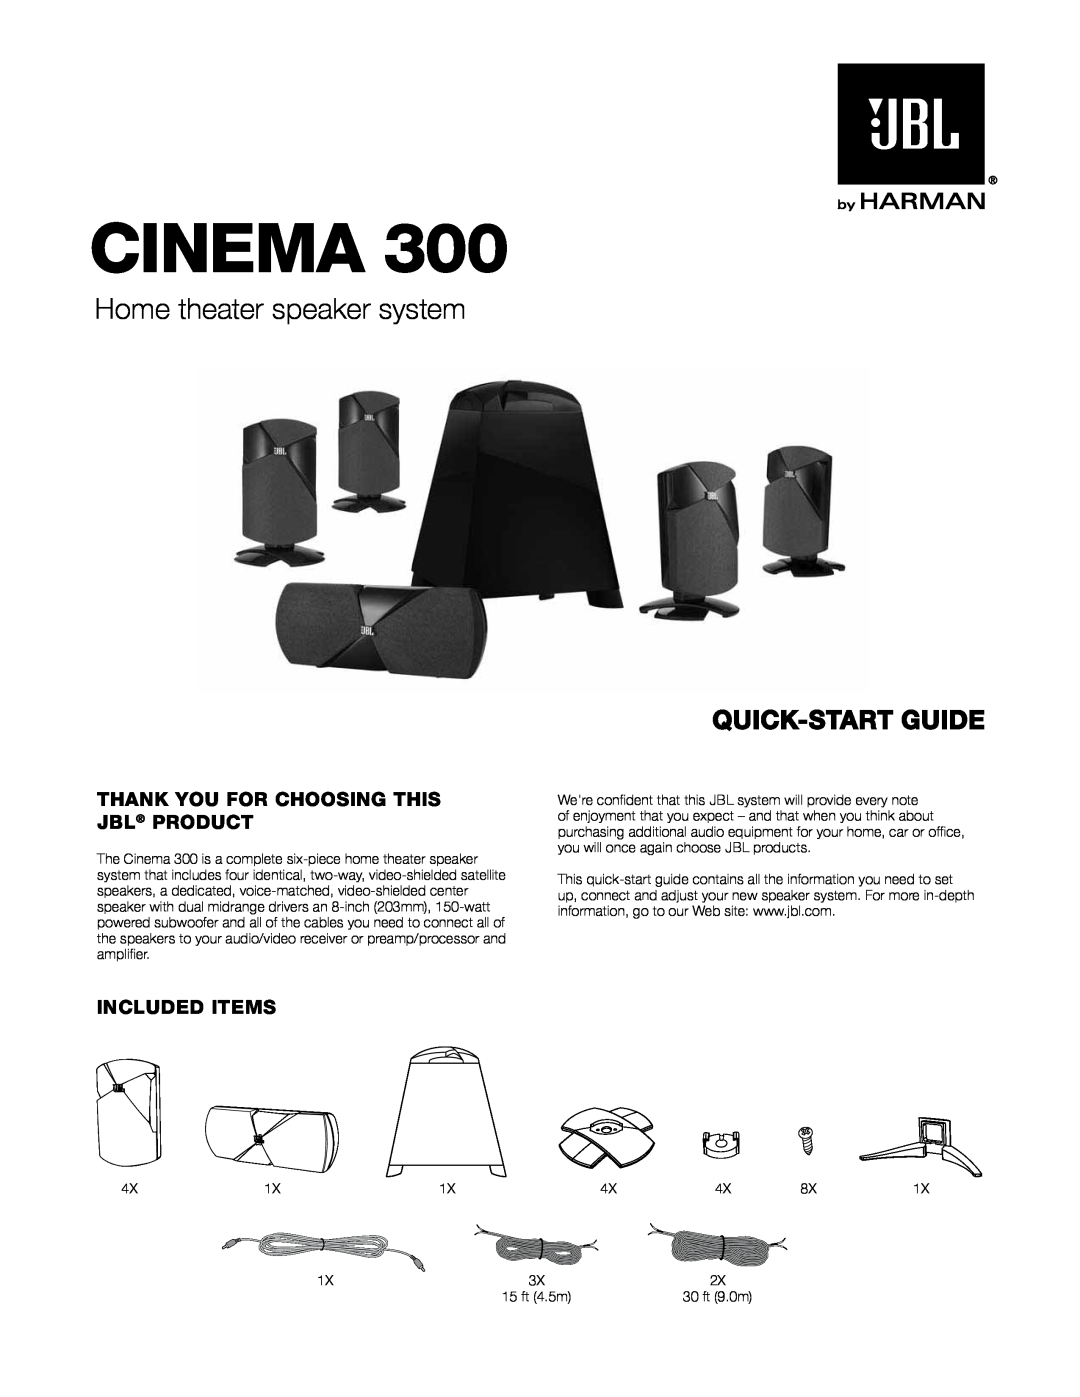 JBL 300 quick start Thank You For Choosing This Jbl Product, Included Items, Cinema, Home theater speaker system 